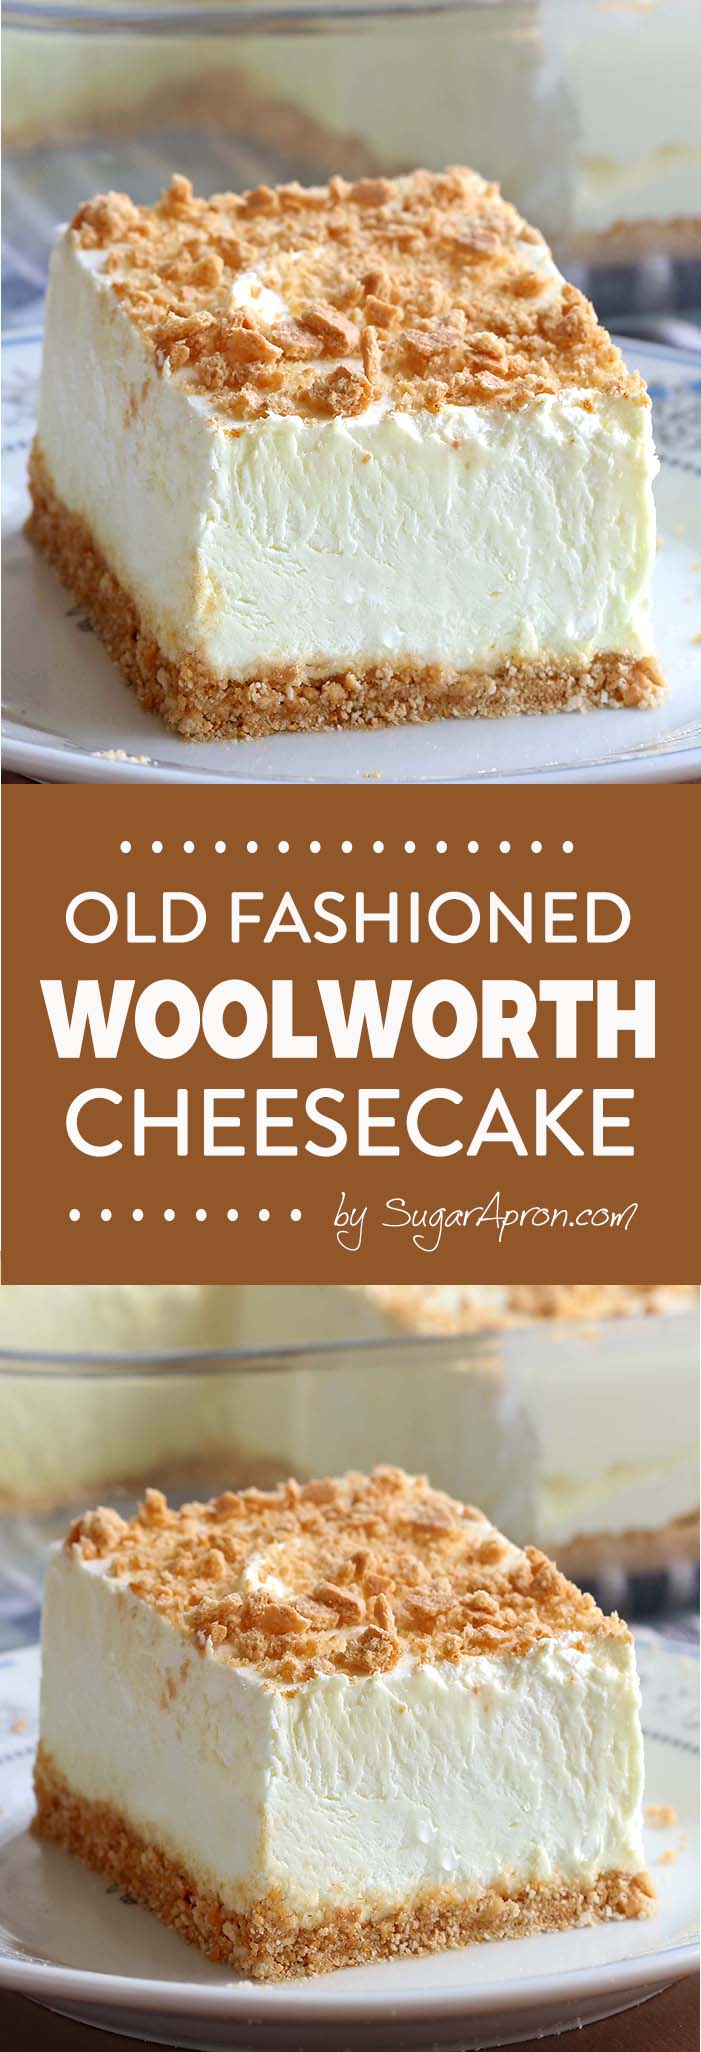 No Bake Woolworth Cheesecake is a classic, light and lemony dessert and will be the perfect addition to your Easter or Mother’s Day menu!